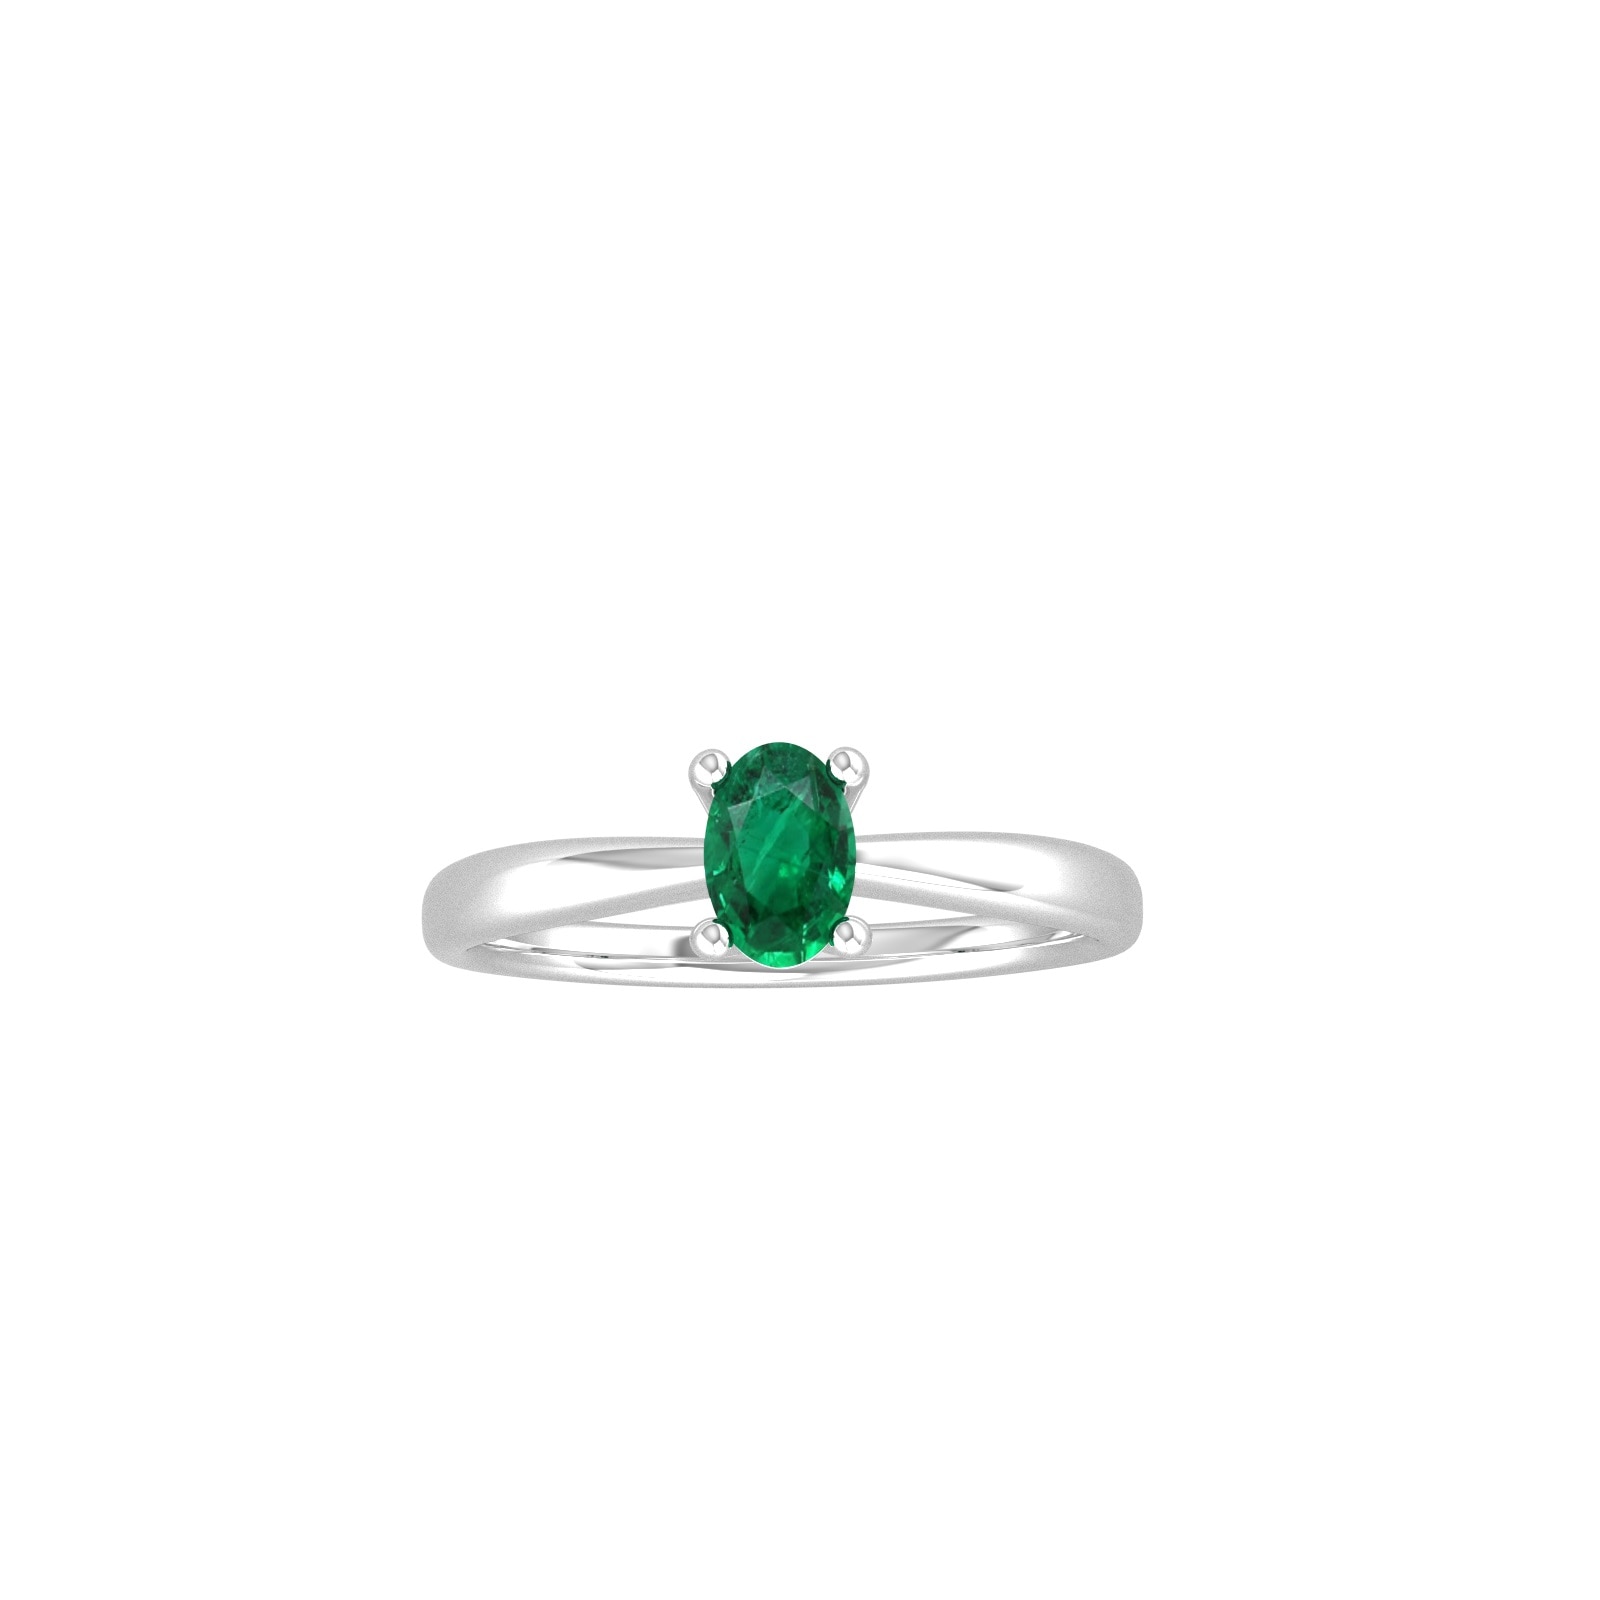 9ct White Gold 4 Claw Oval Emerald Ring